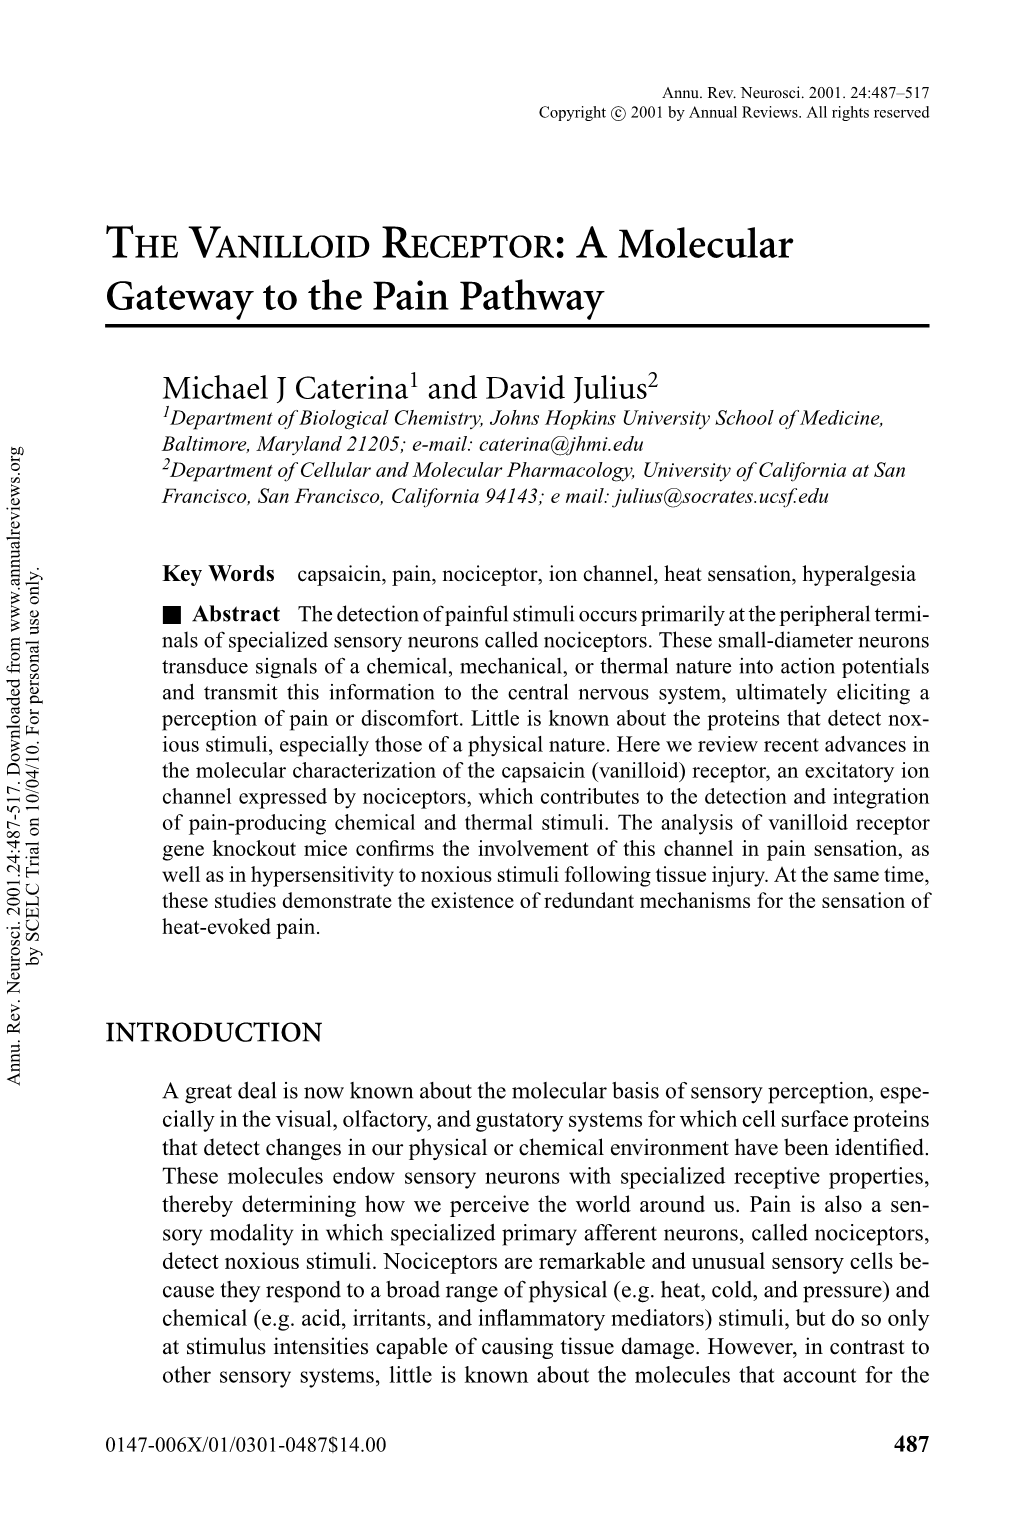 THE VANILLOID RECEPTOR: a Molecular Gateway to the Pain